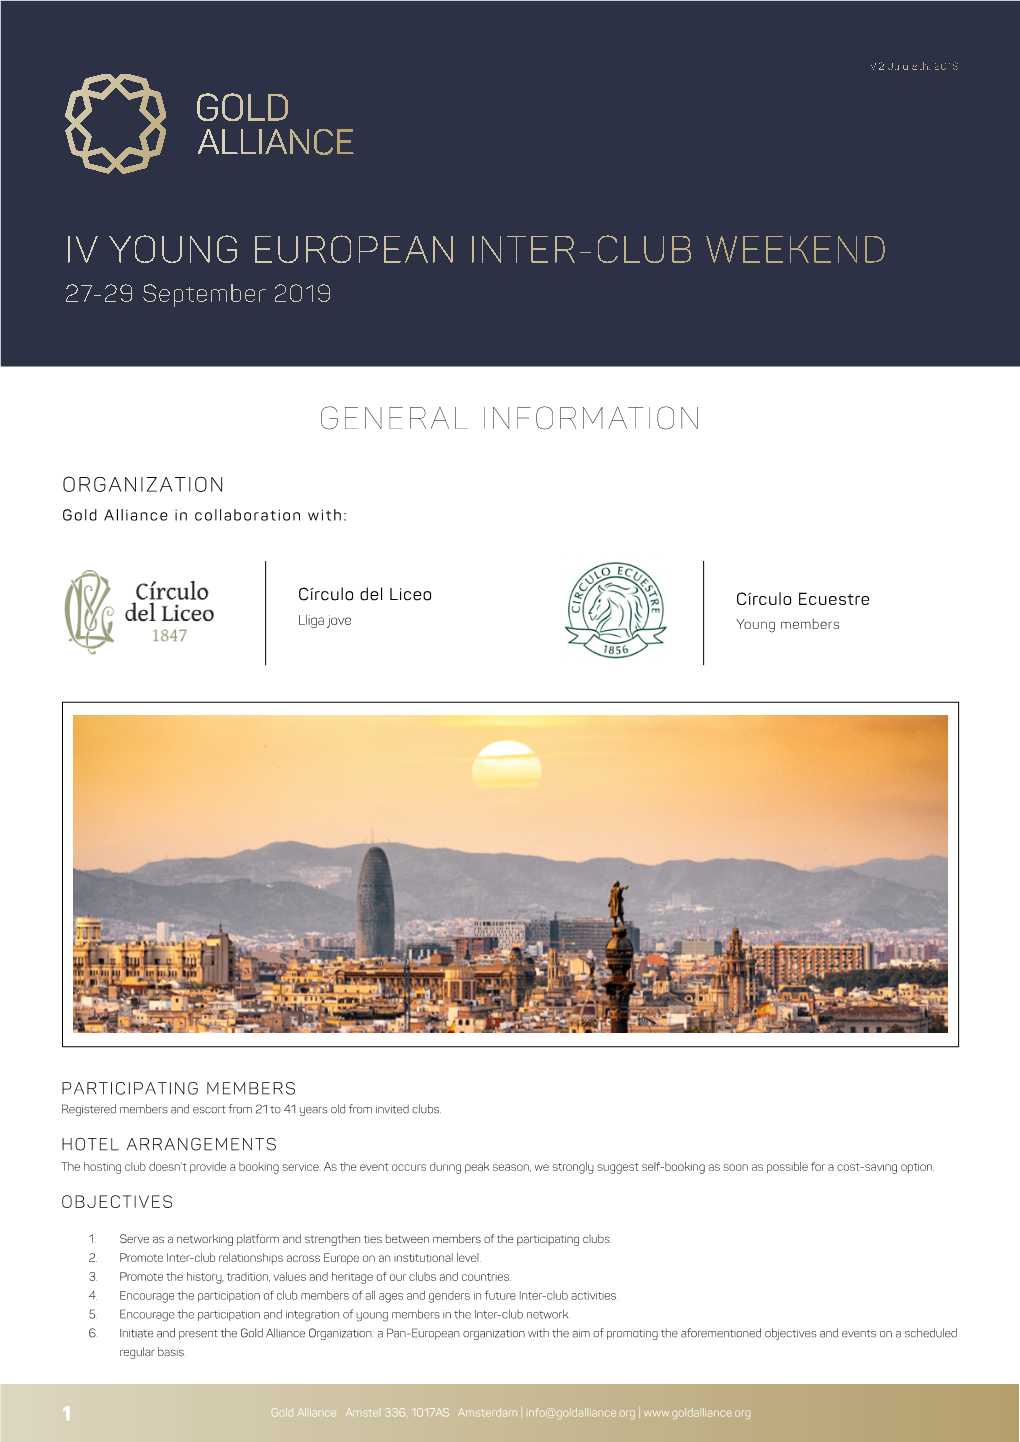 IV YOUNG EUROPEAN INTER-CLUB WEEKEND 27-29 September 2019